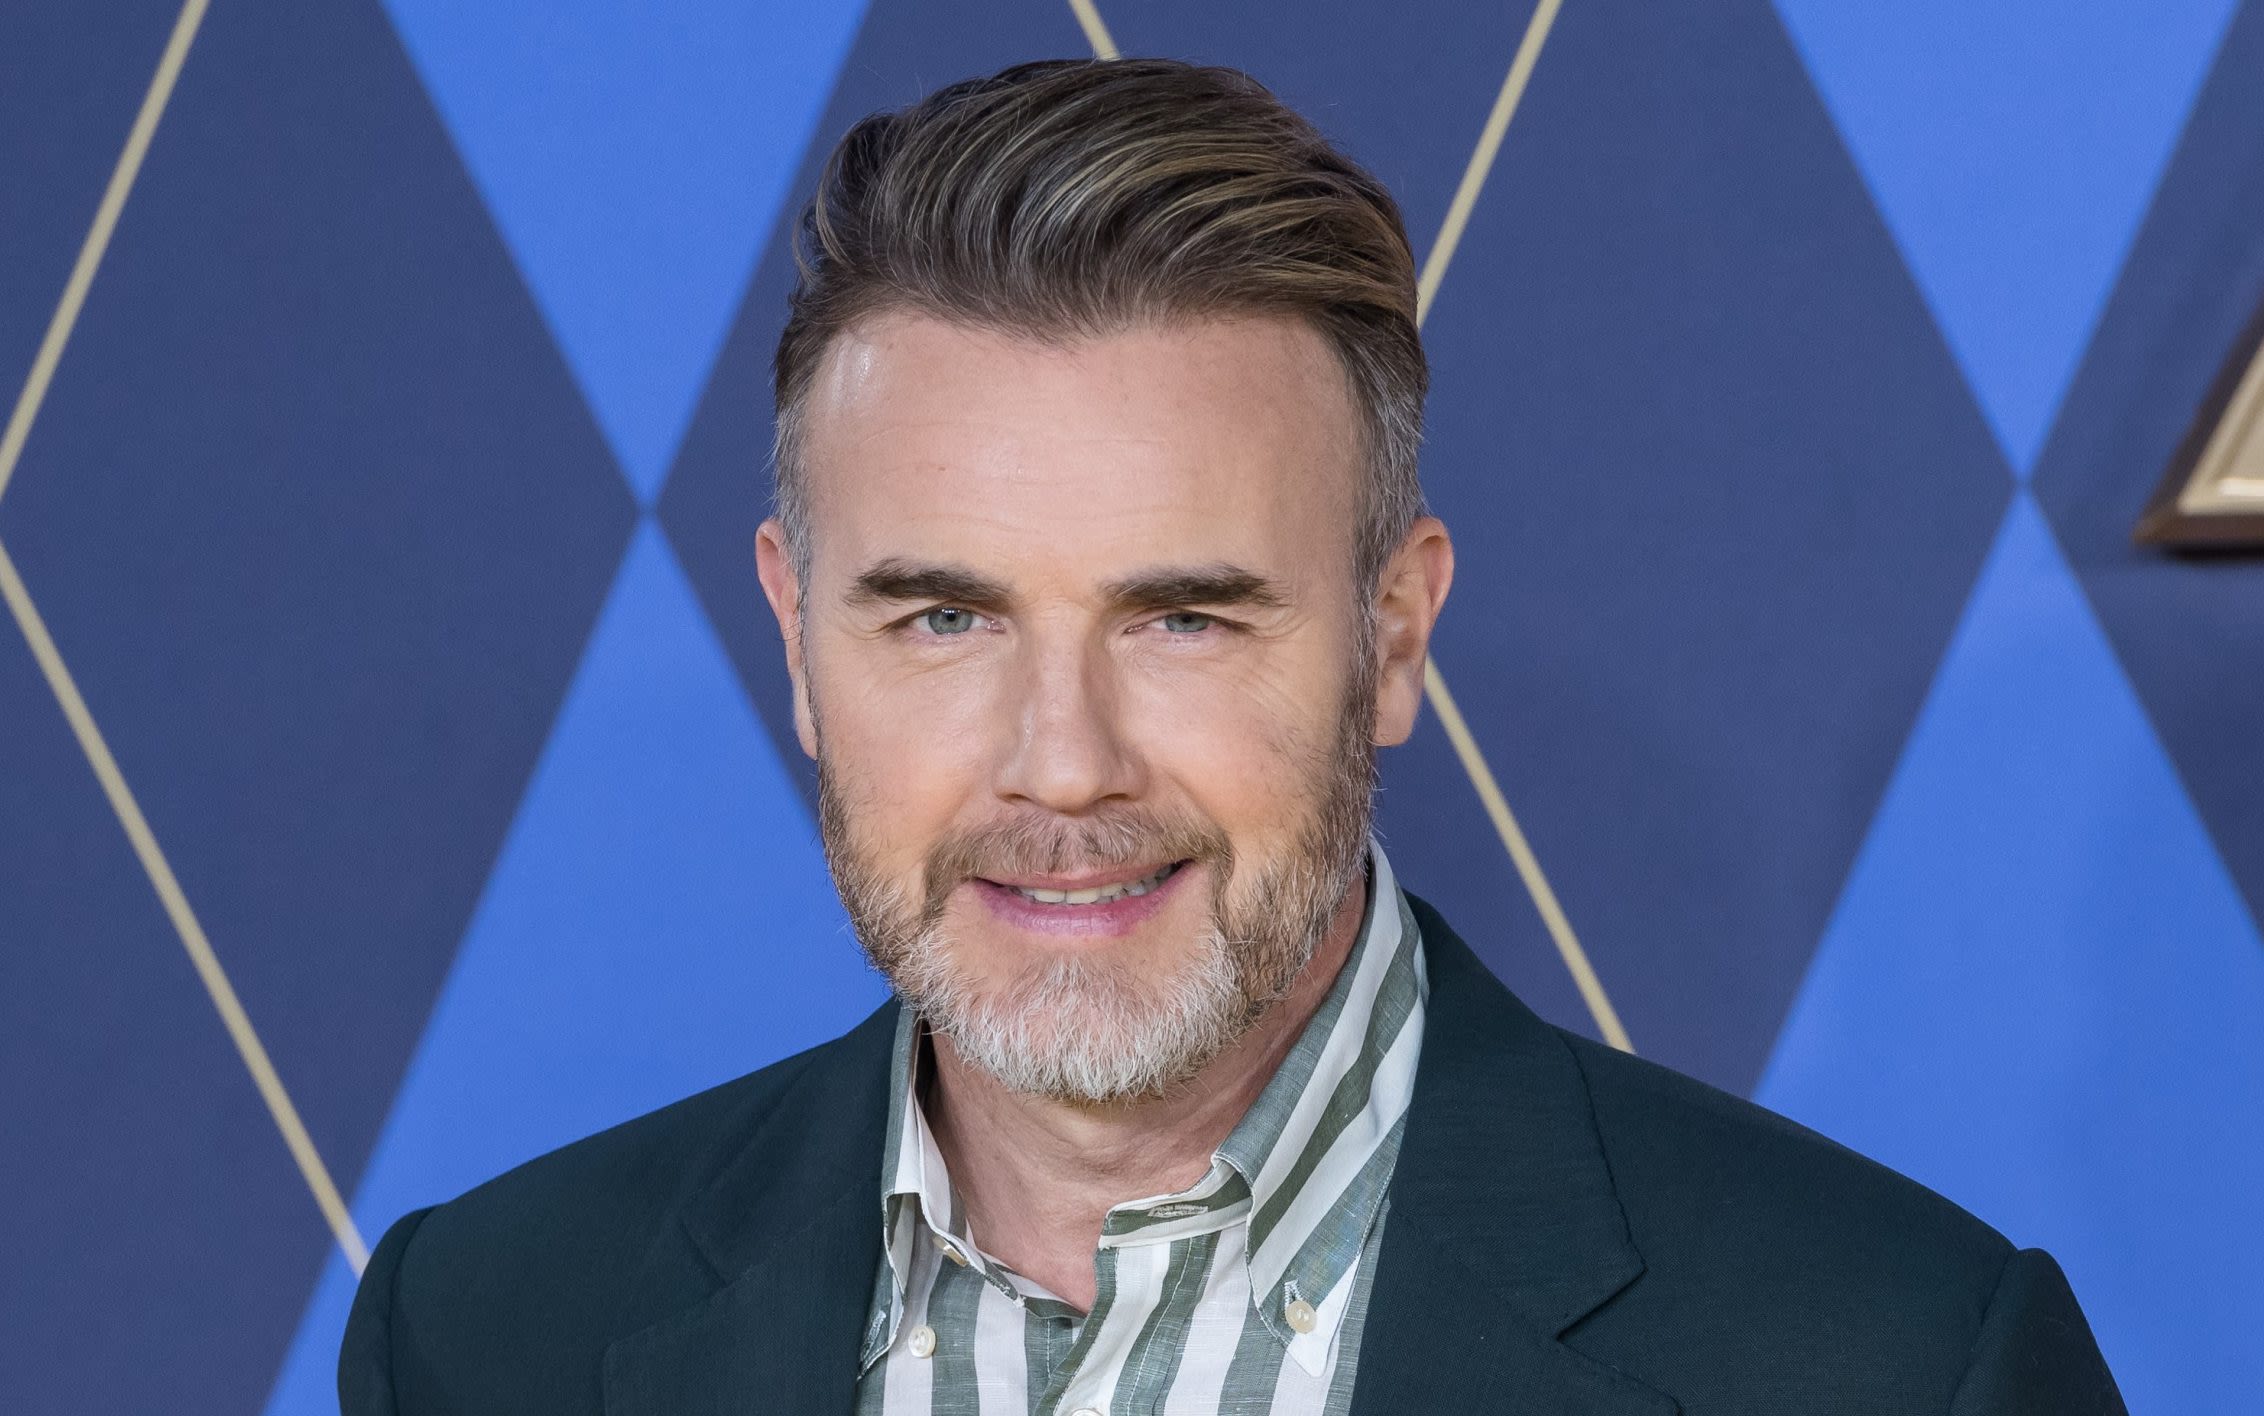 Gary Barlow’s home burgled while he was away filming for Ant and Dec’s variety show